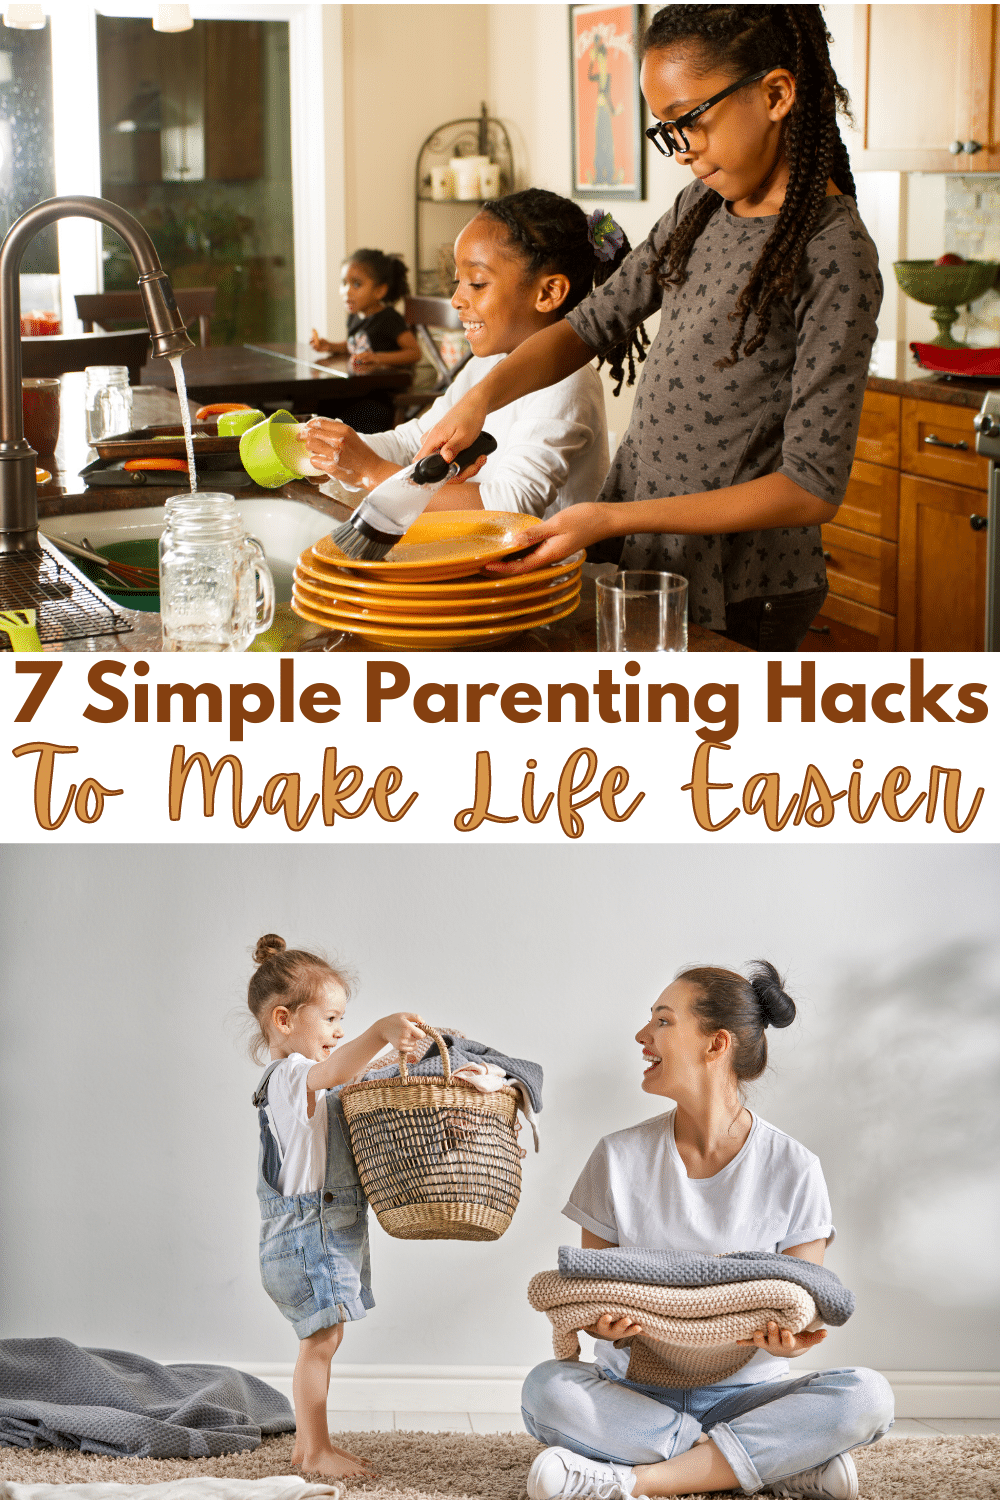 Here are 7 simple parenting hacks to help make your parenting life a little bit easier. I hope these parenting tips help you feel like a superhero mom. #parentinghacks #parentingtips #busymom #parenting via @wondermomwannab